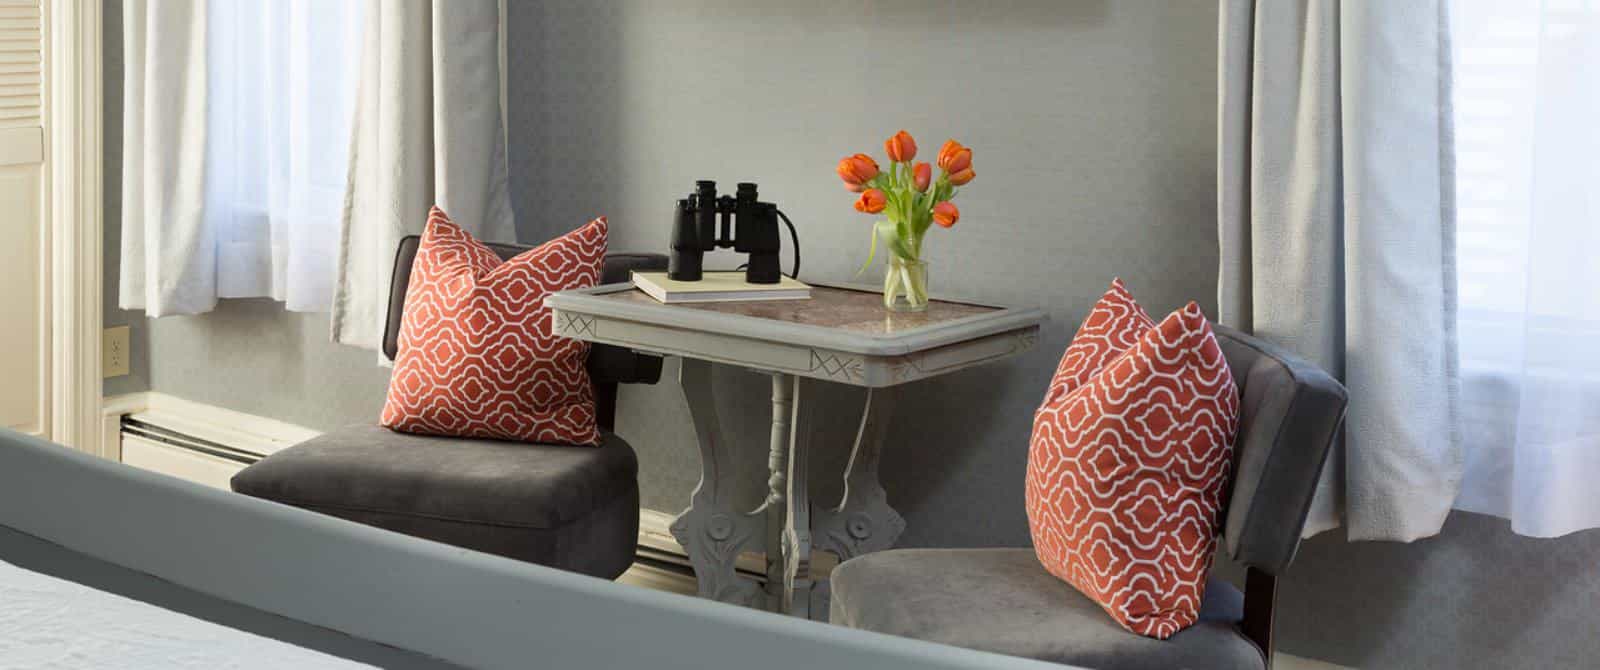 Sitting area with gray upholstered chairs, orange and white brocade pillows, antiqued table, binoculars, and small vase with orange tulips